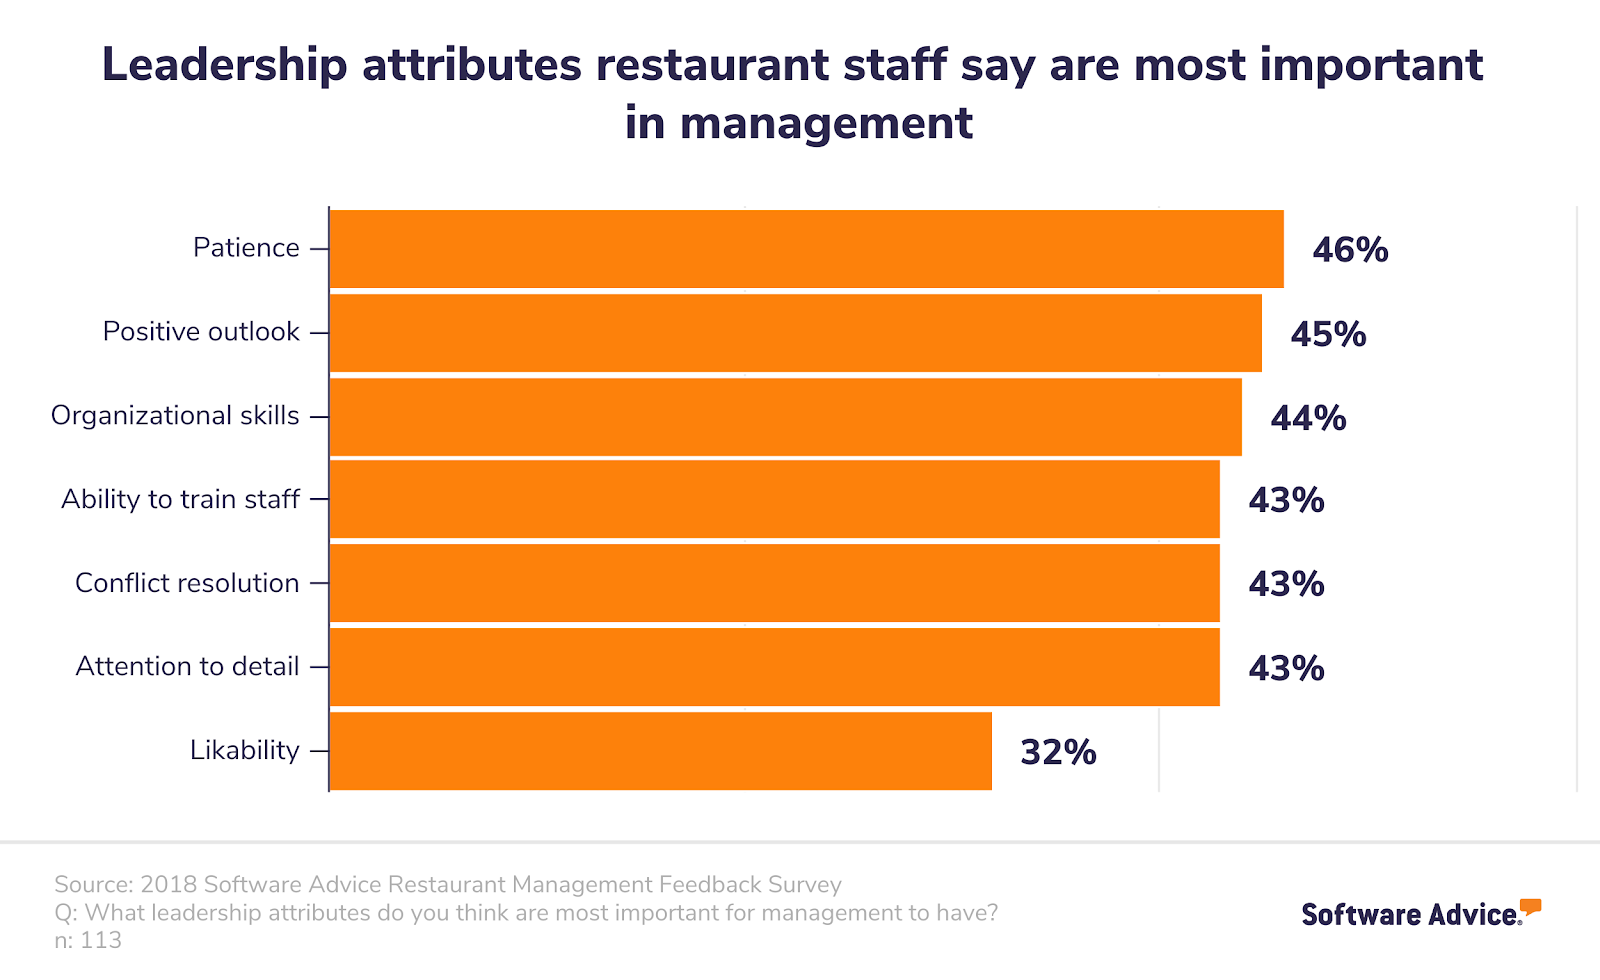 How-Frequently-Restaurant-Managers-Sought-Feedback-from-their-Waiters